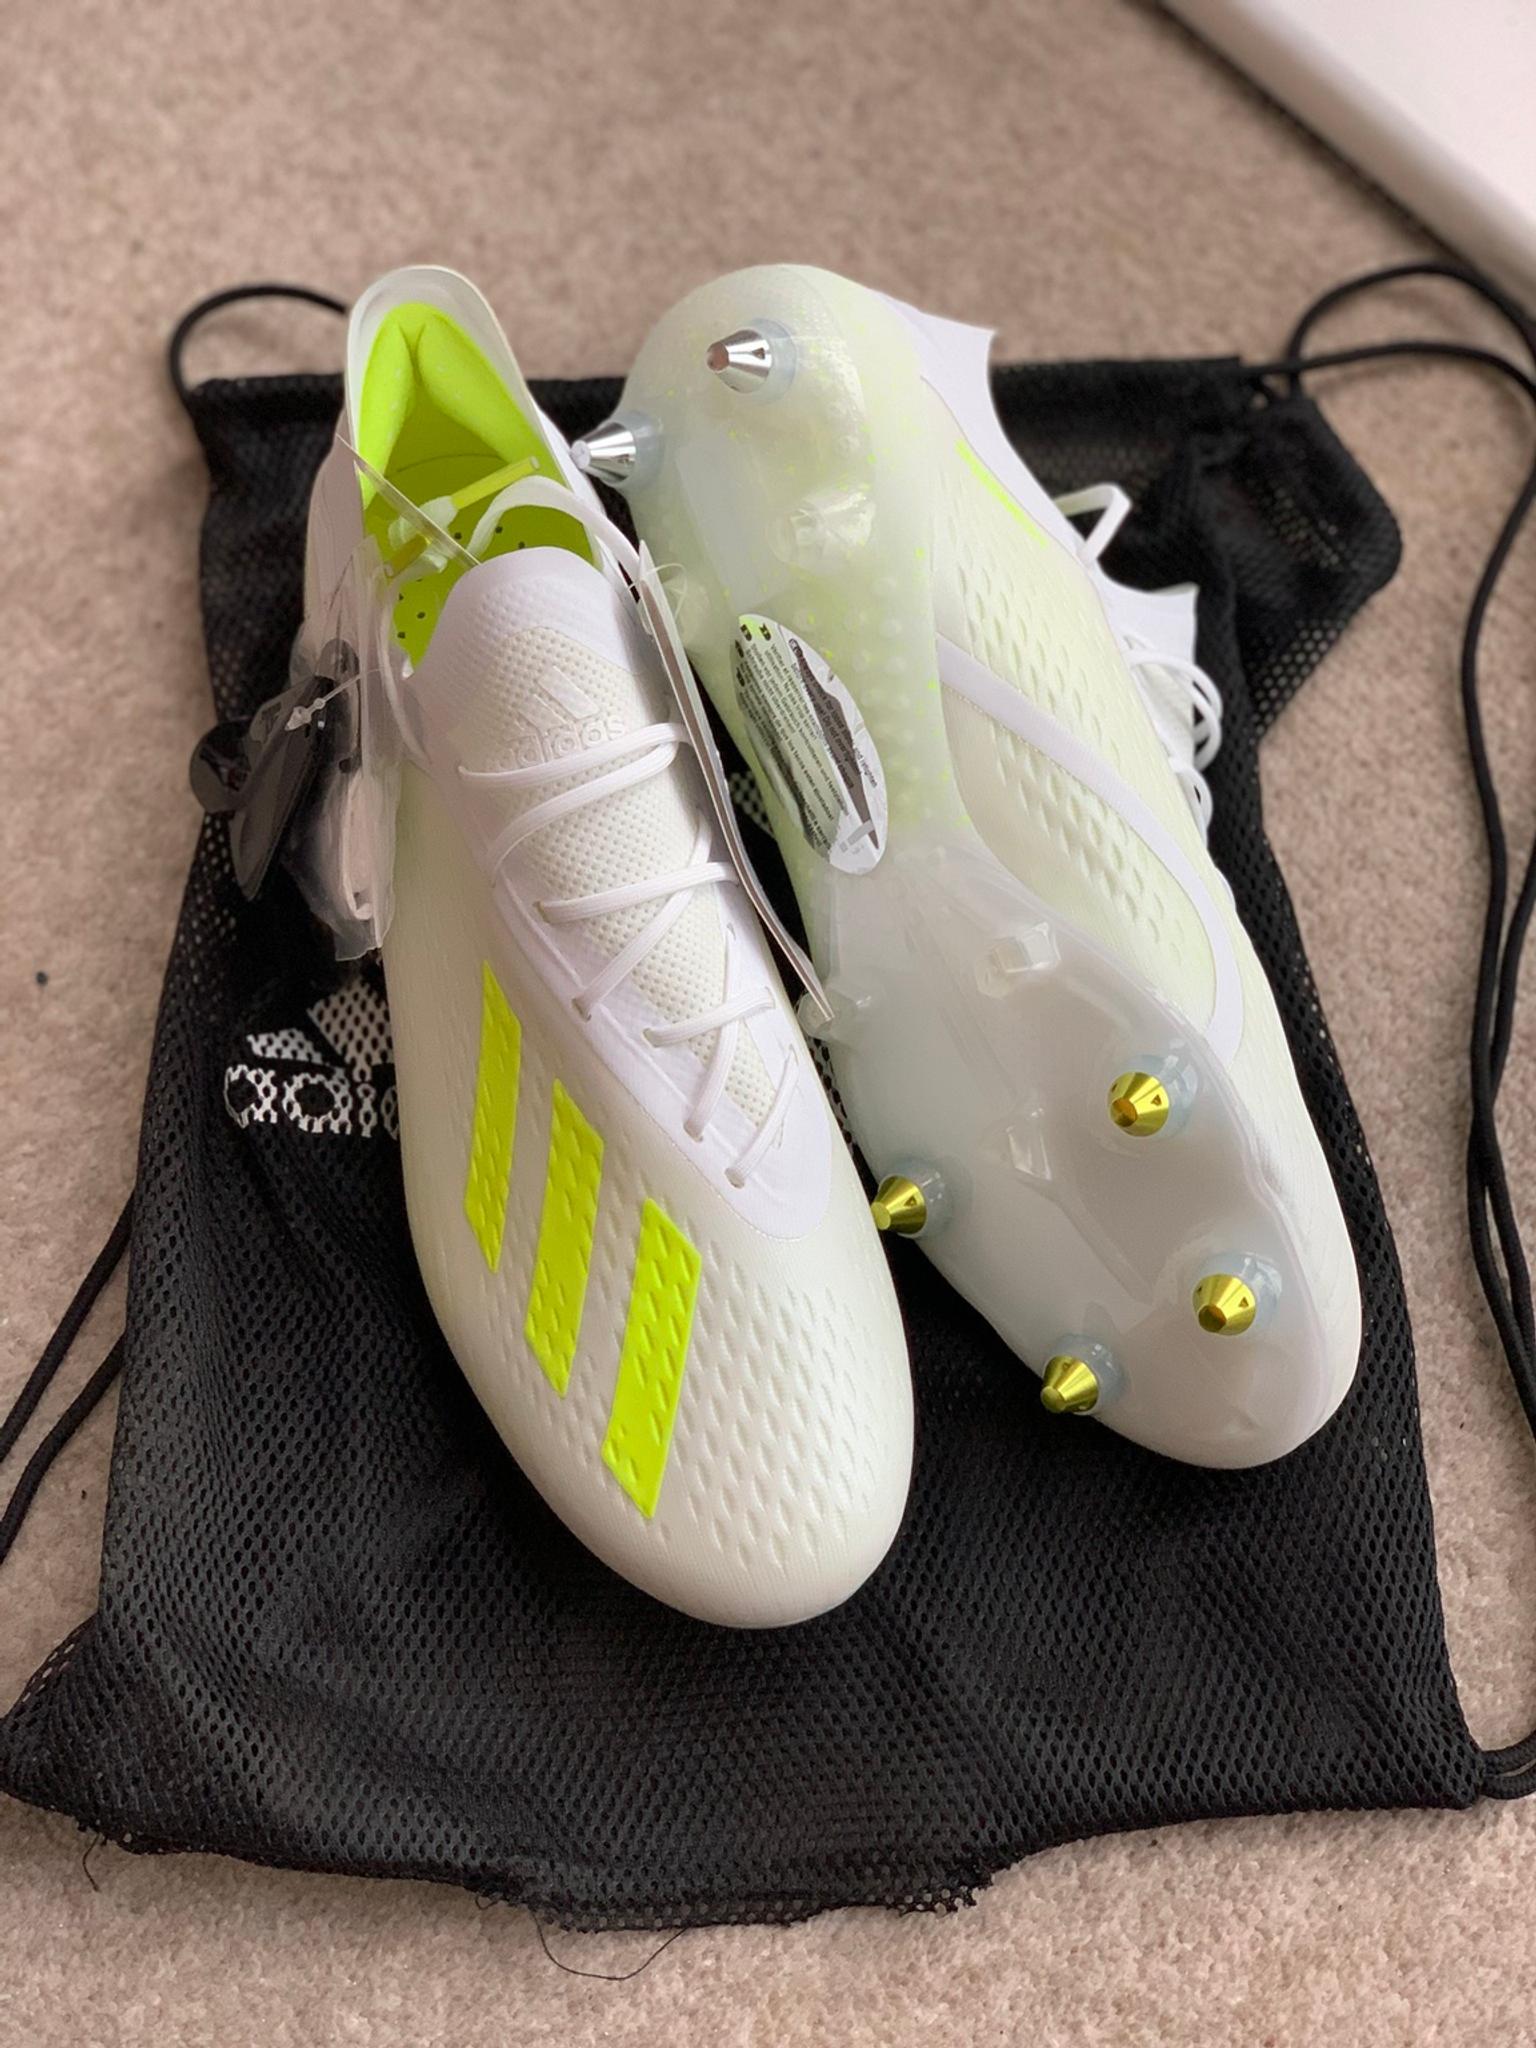 Adidas X 18.1 SG in E4 London for £75 